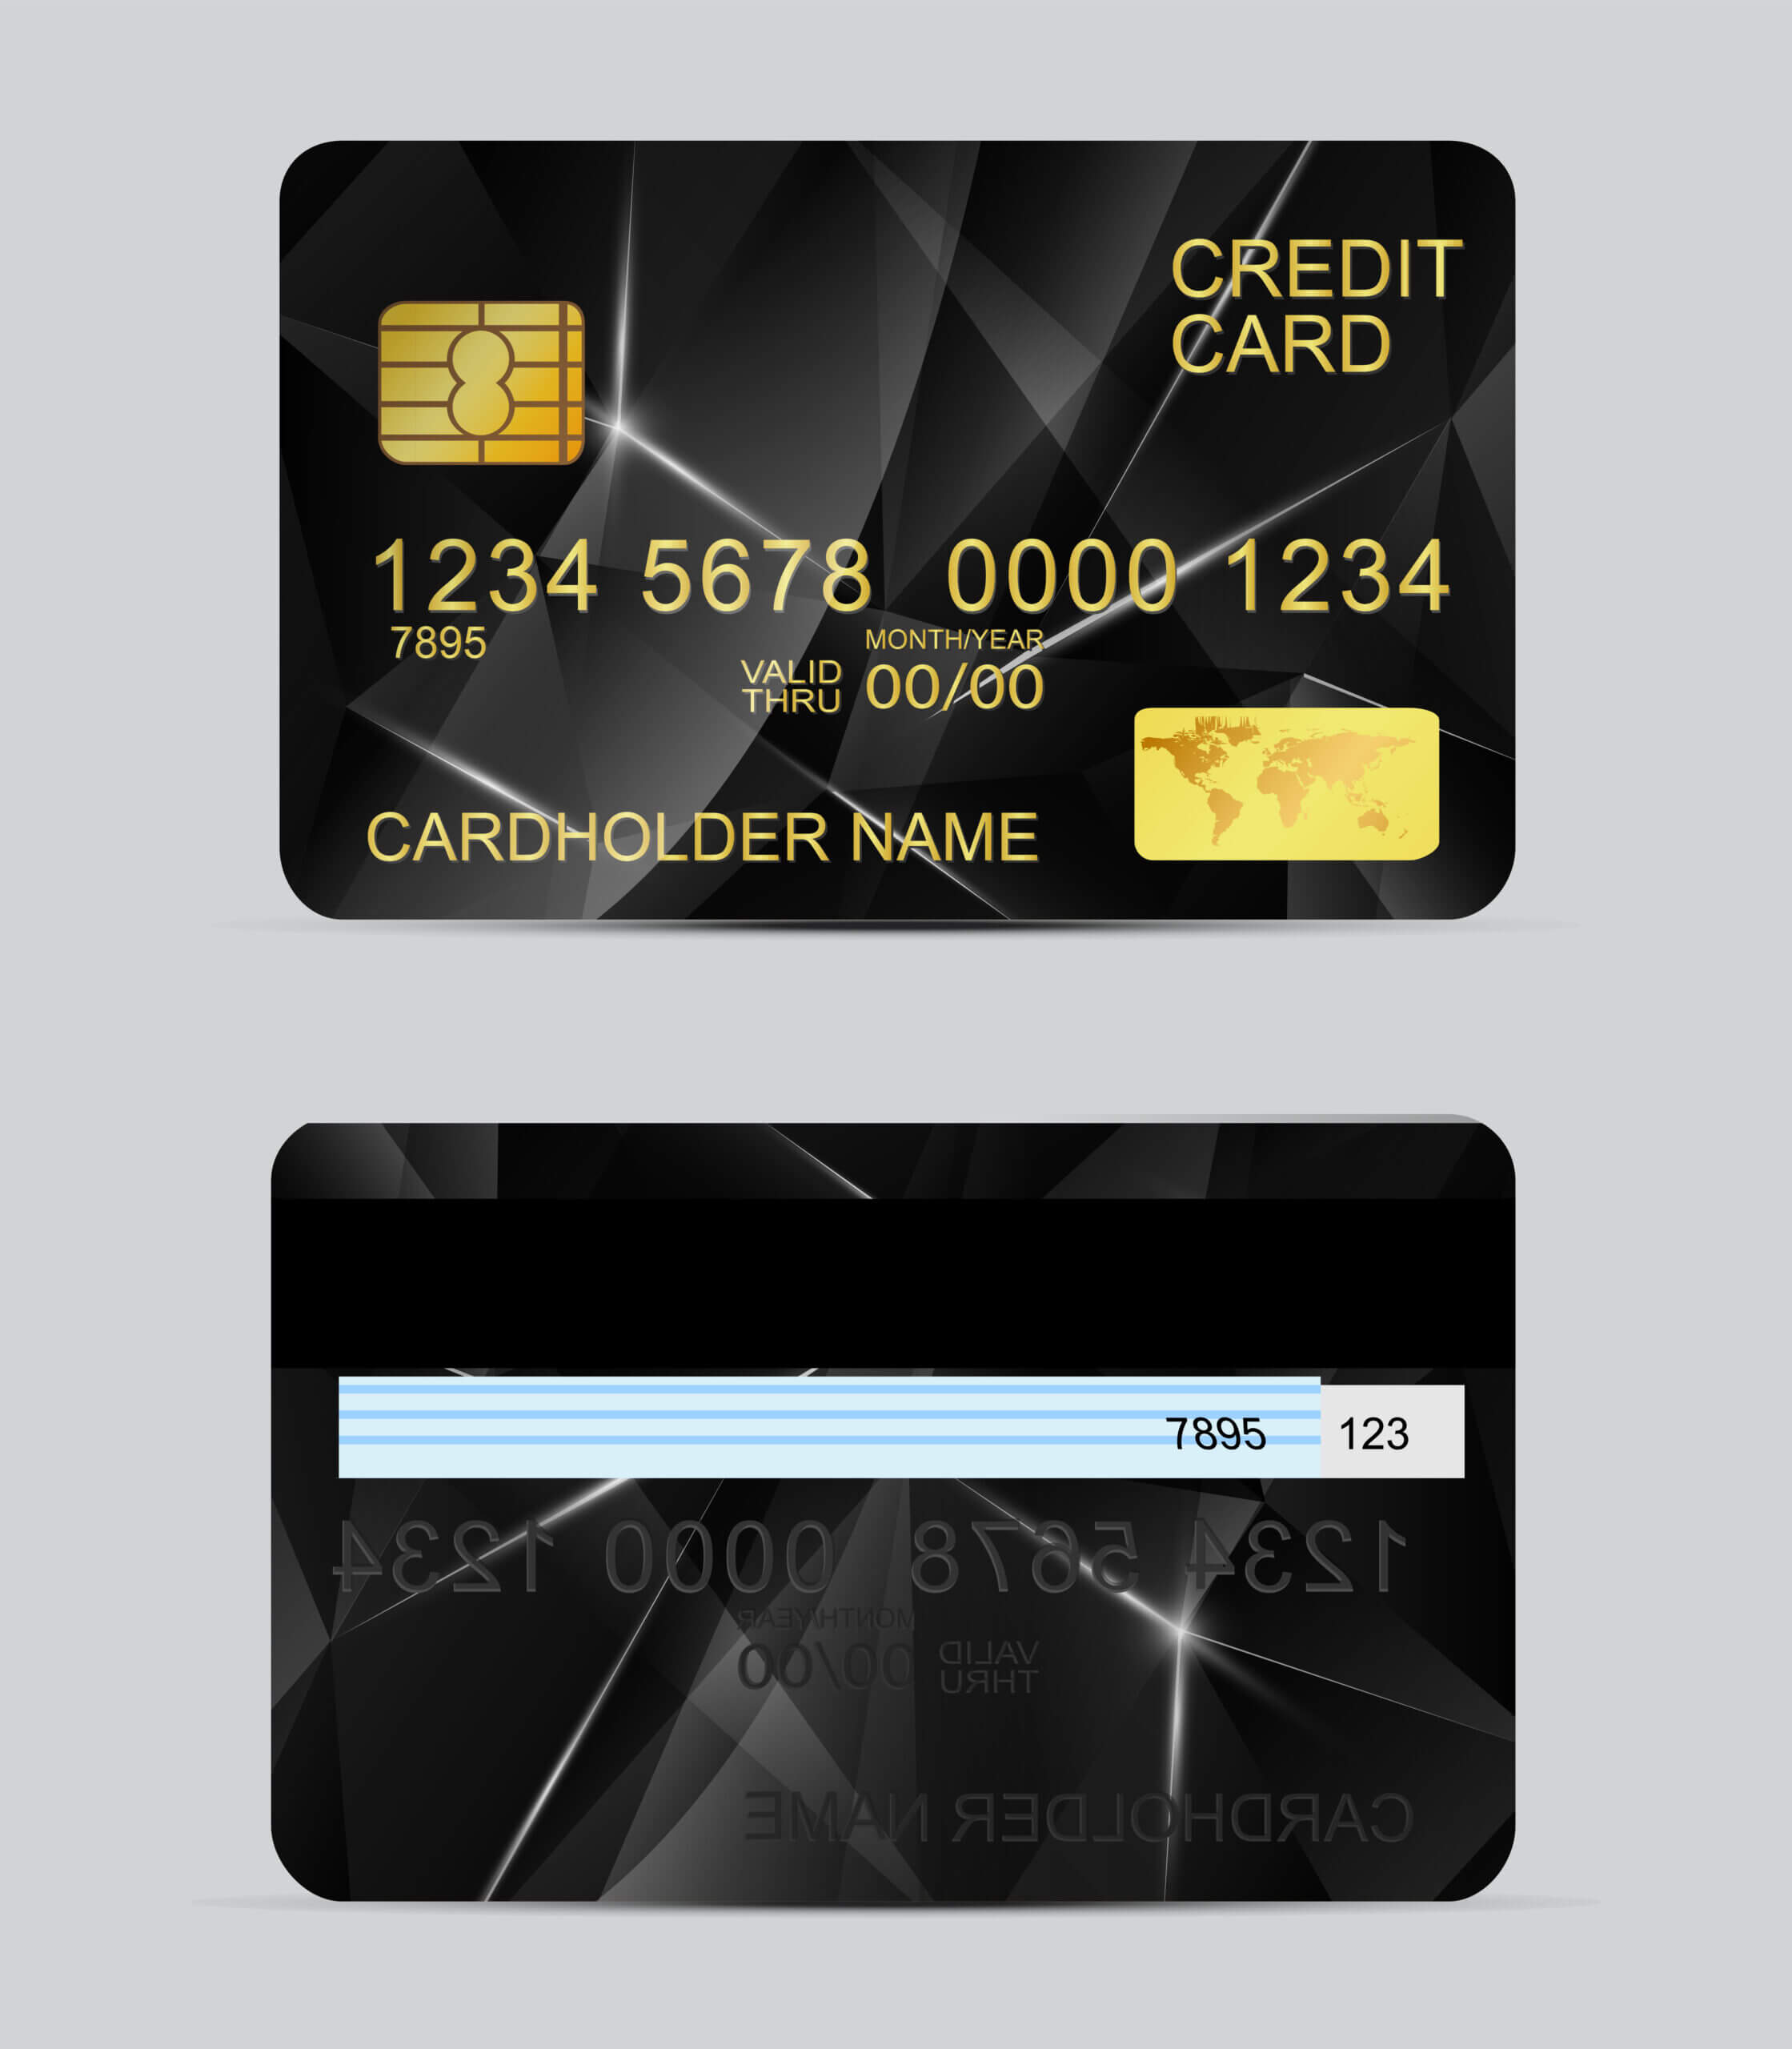 Polygon Texture Realistic Credit Cards Templates - Download Within Credit Card Templates For Sale